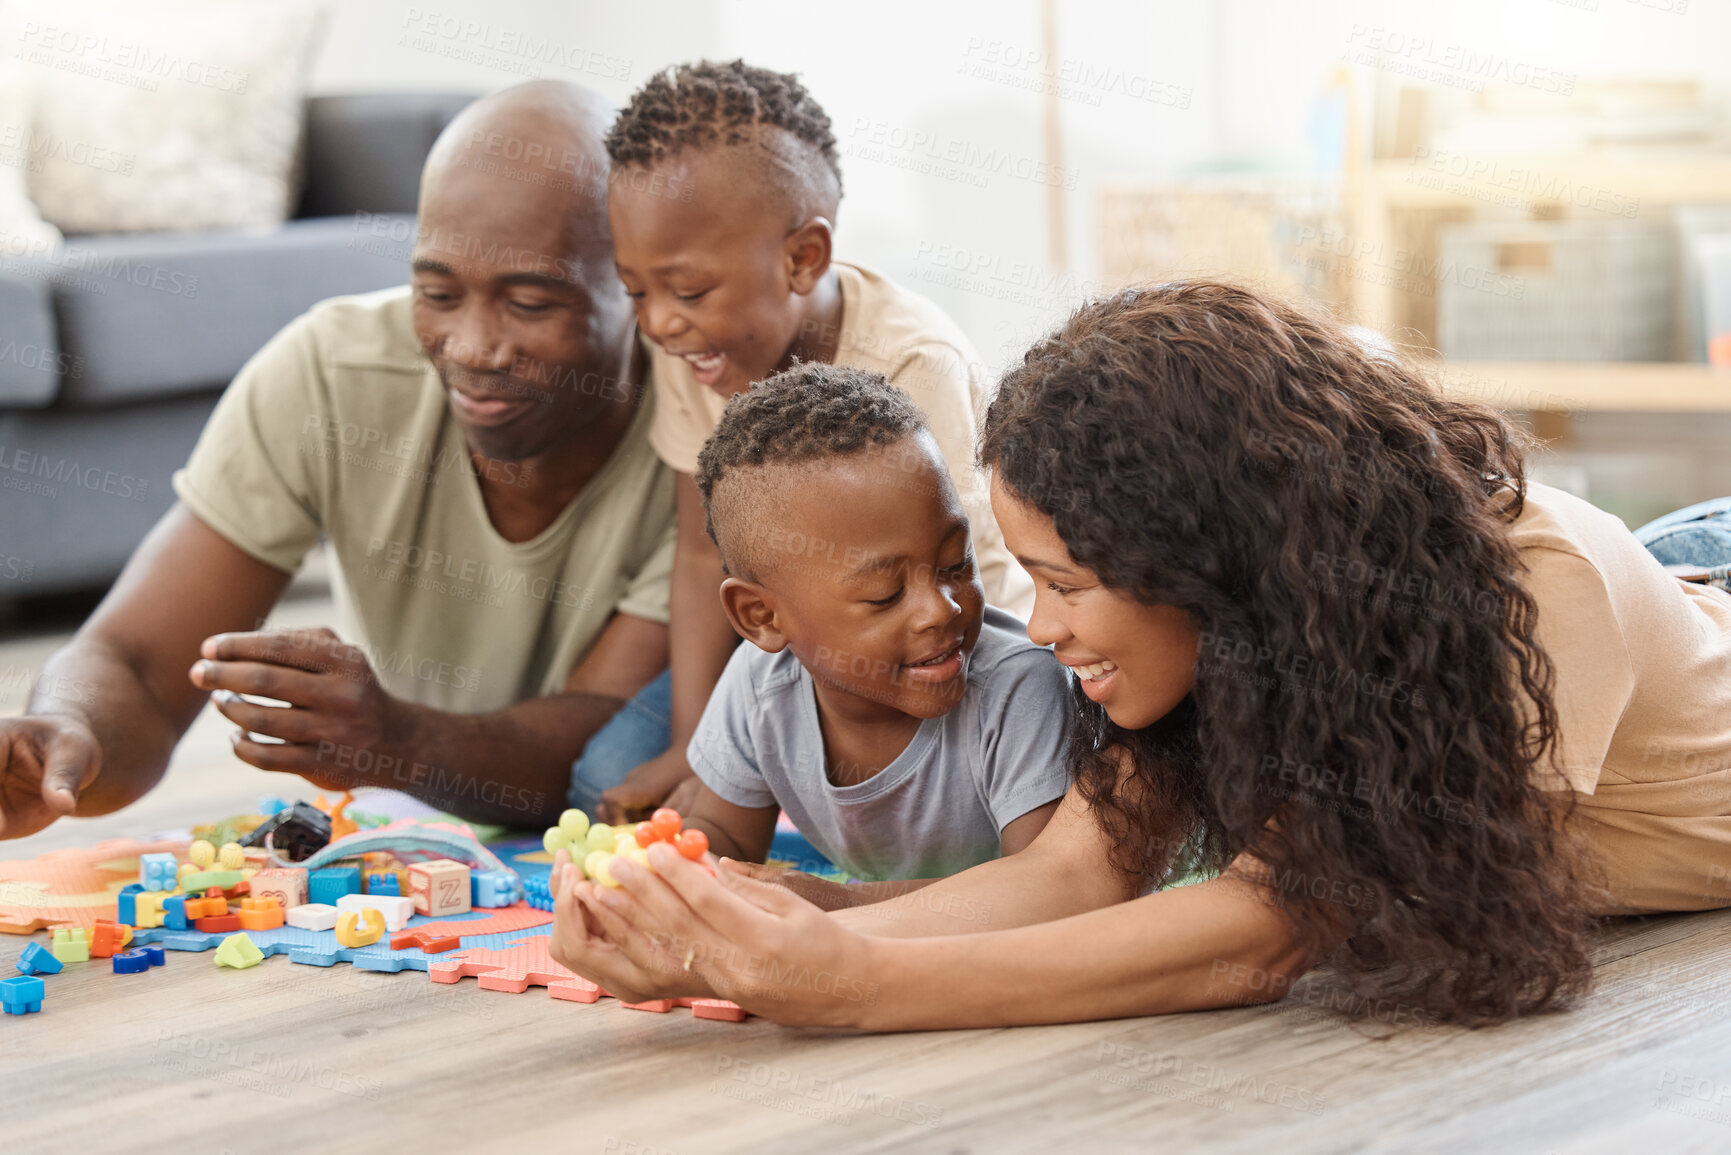 Buy stock photo Shot of a happy young family playing together on the floor at home